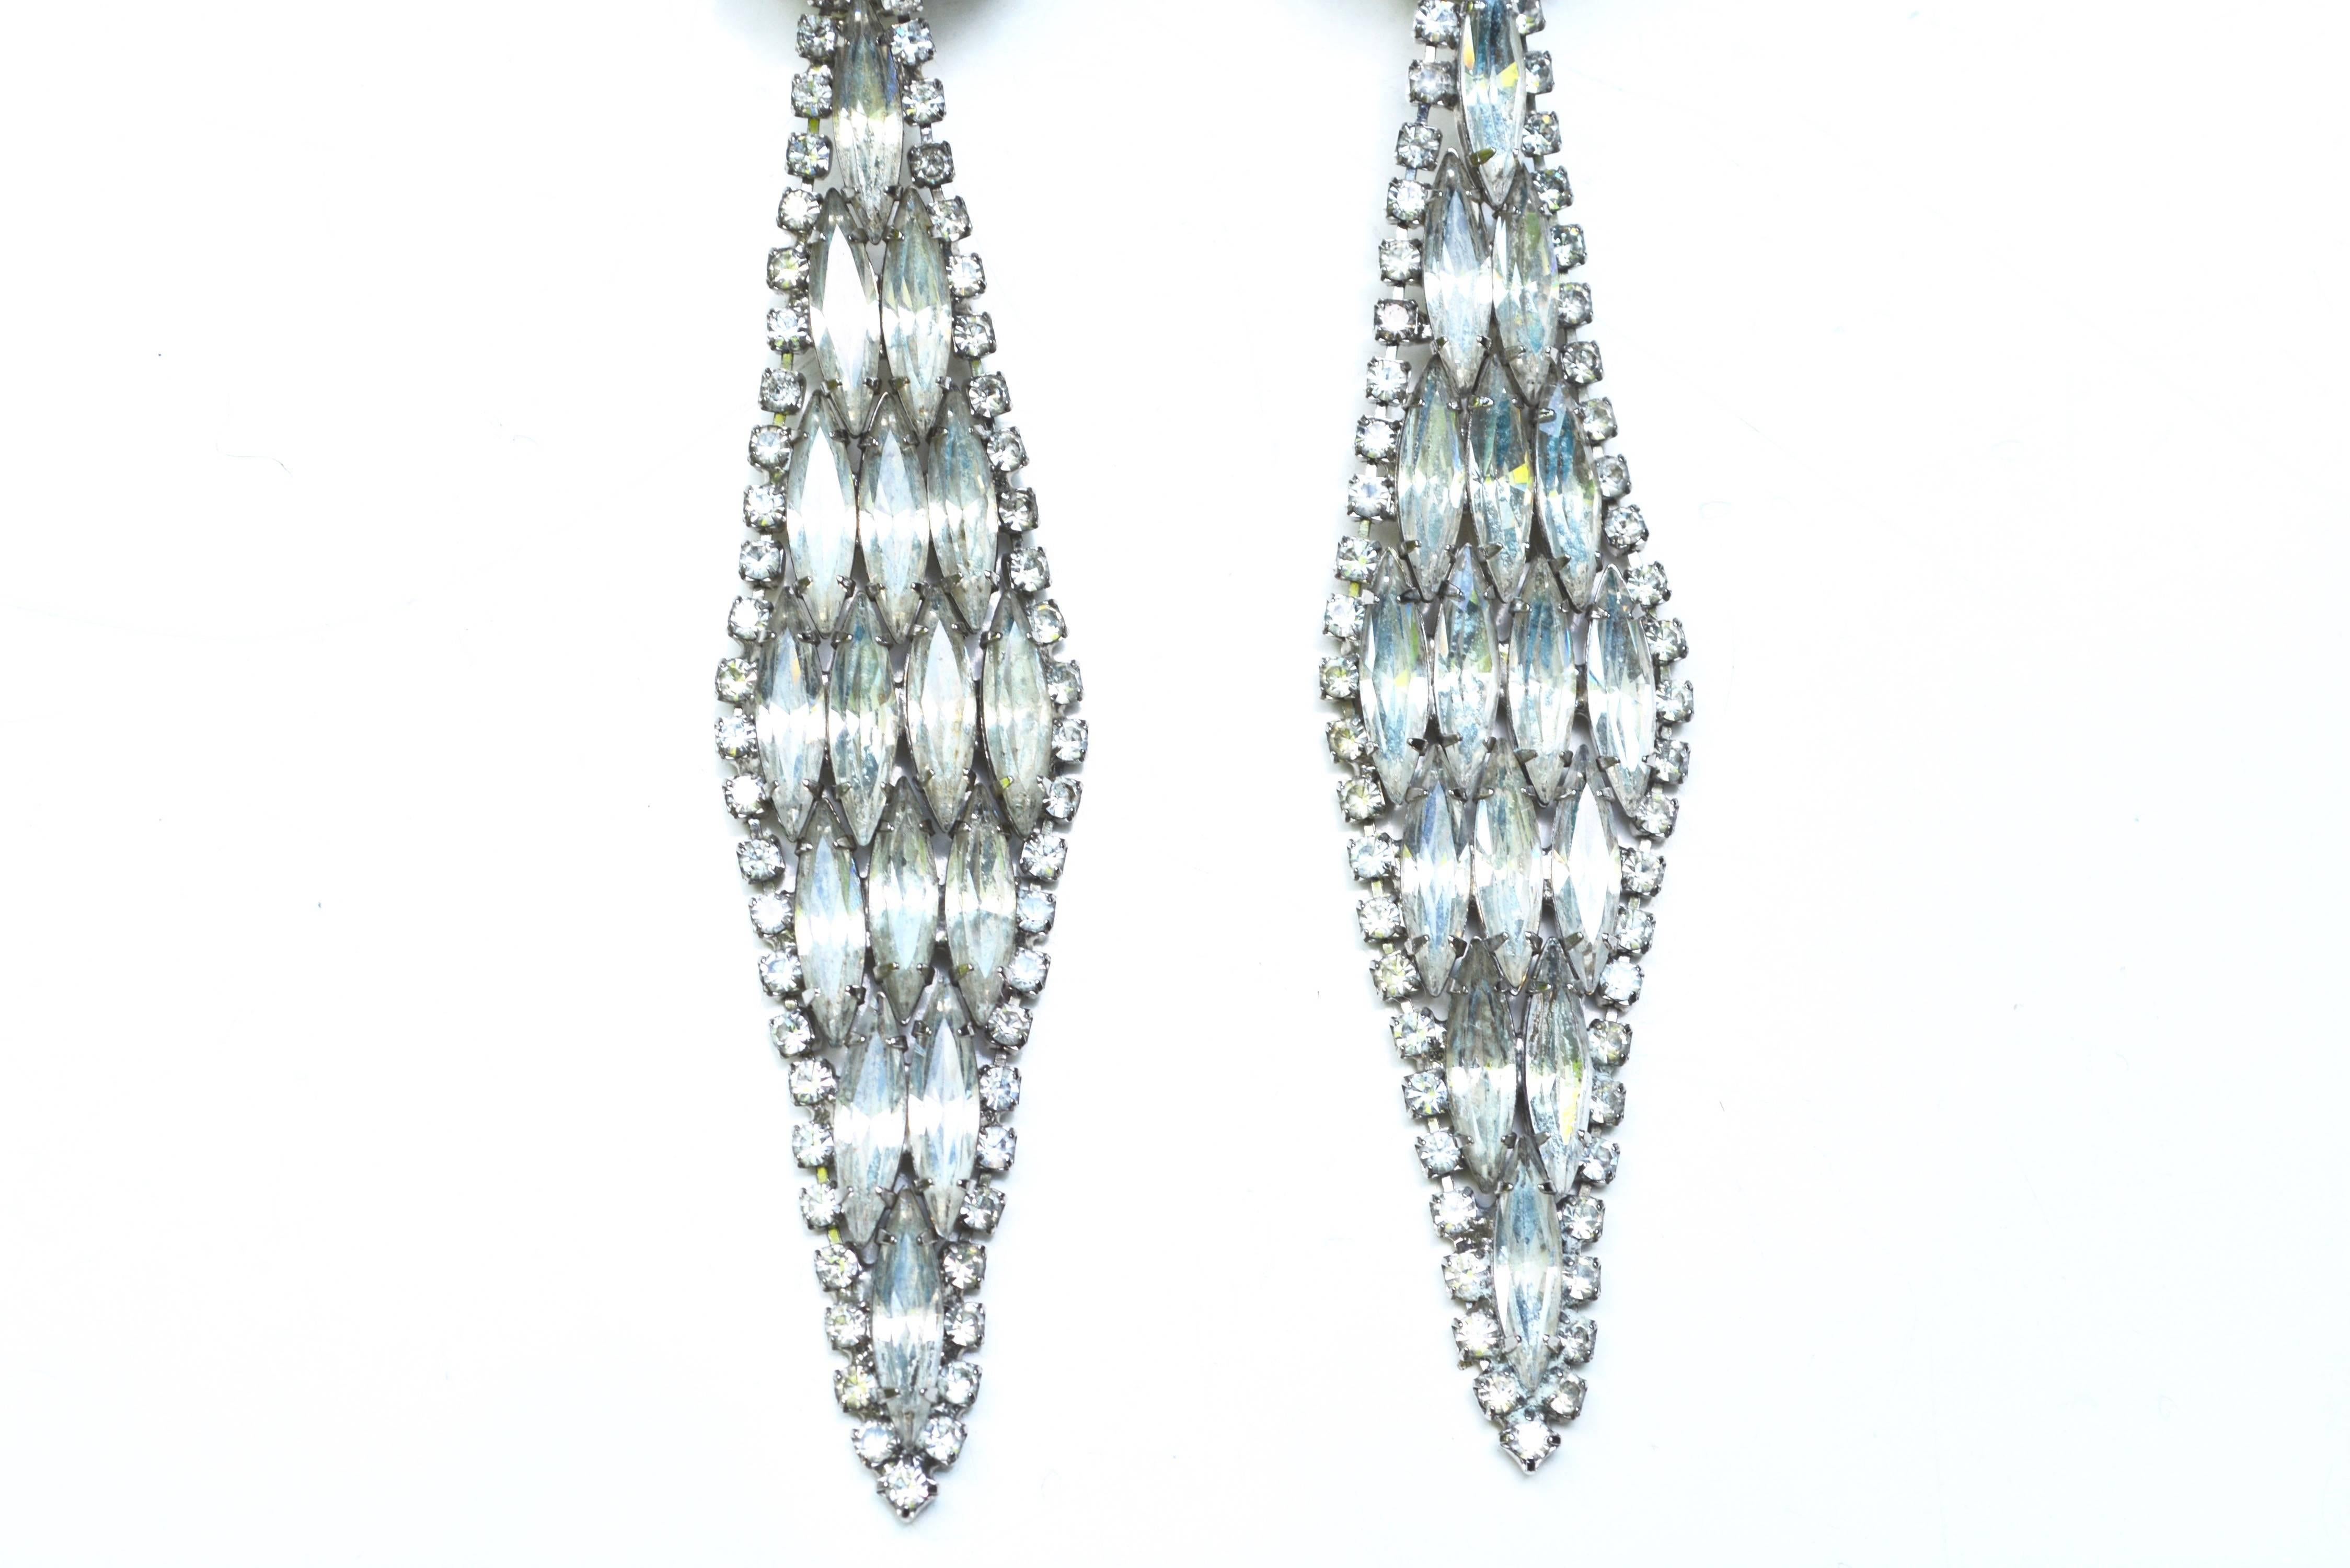 Glam large elongated diamond style clip on earrings, not signed. Good condition to wear, but there are a couple darkened stones on the circular clips. Some age to larger stones but nothing that takes away from the sparkle! 4.5″ long by about 1″